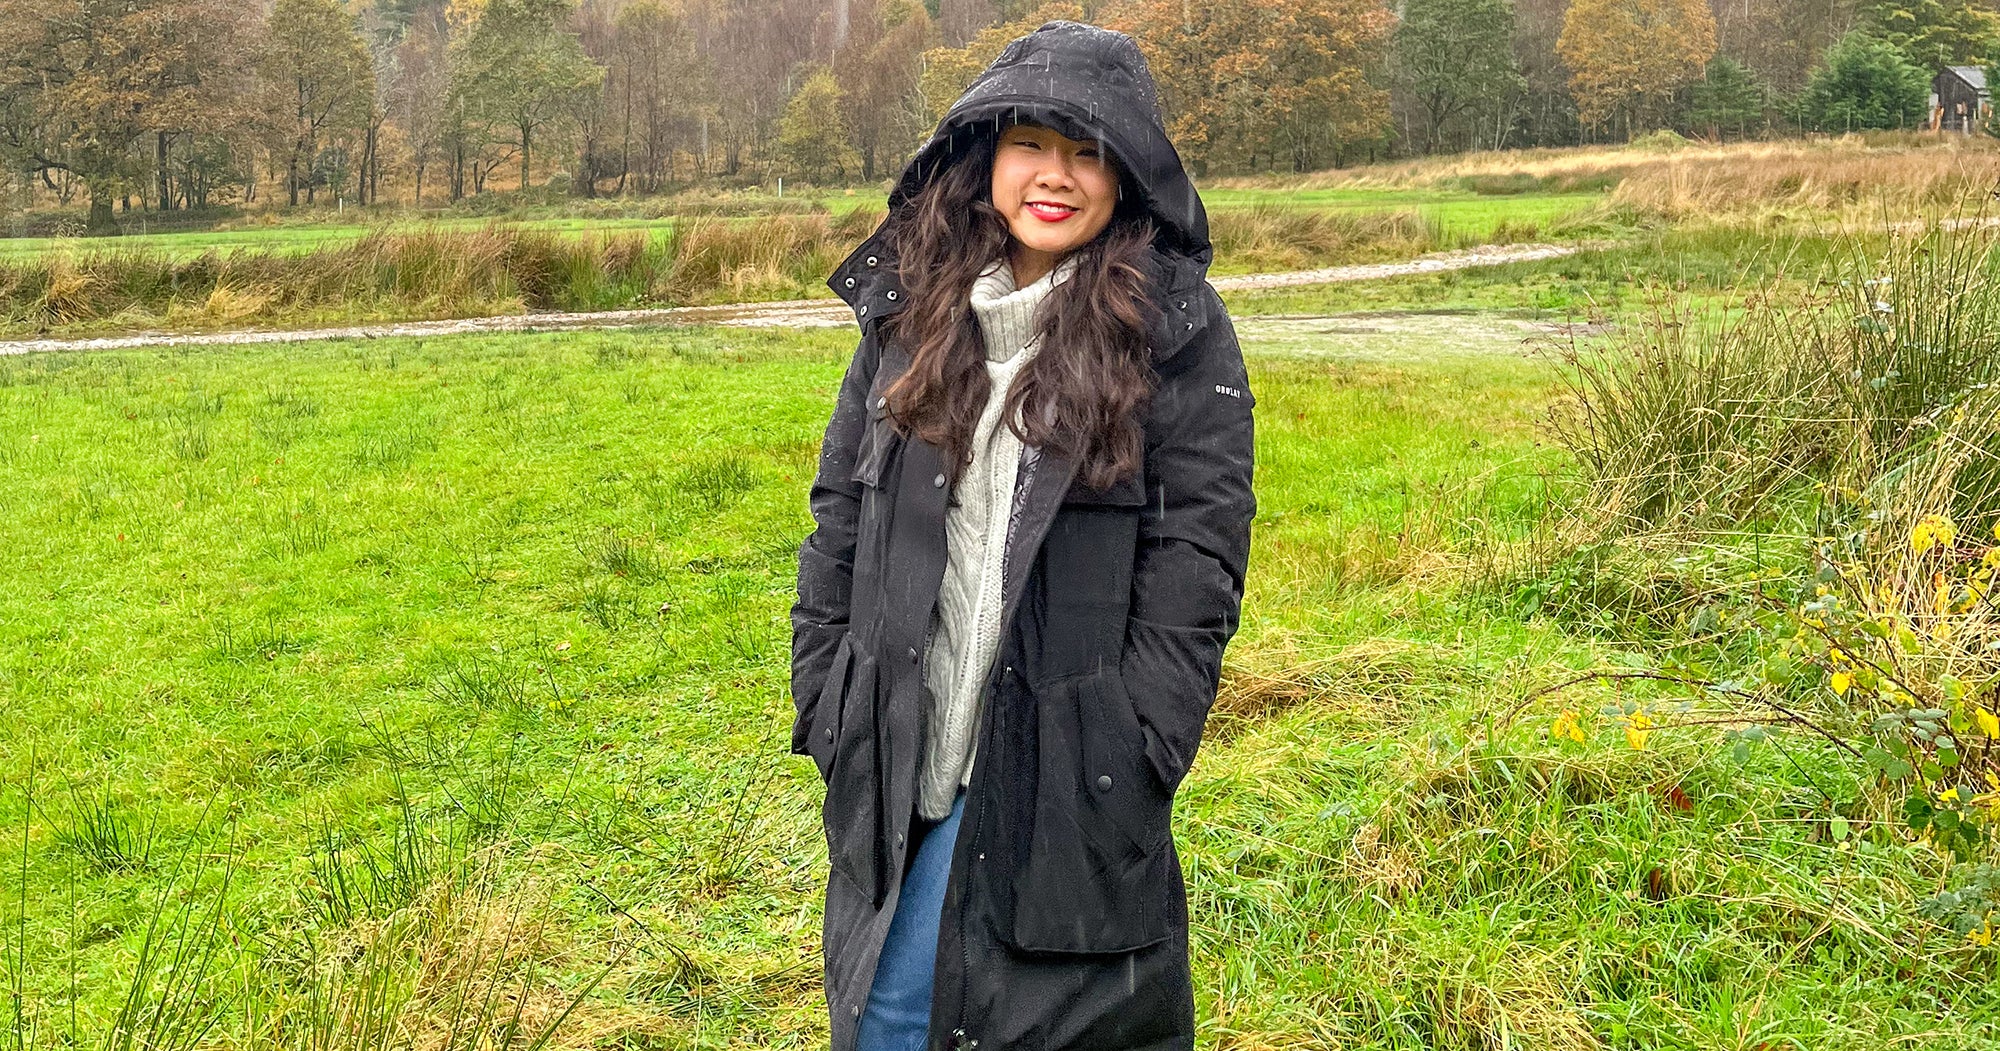 This Waterproof Orolay Coat From Amazon Is My Winter MVP